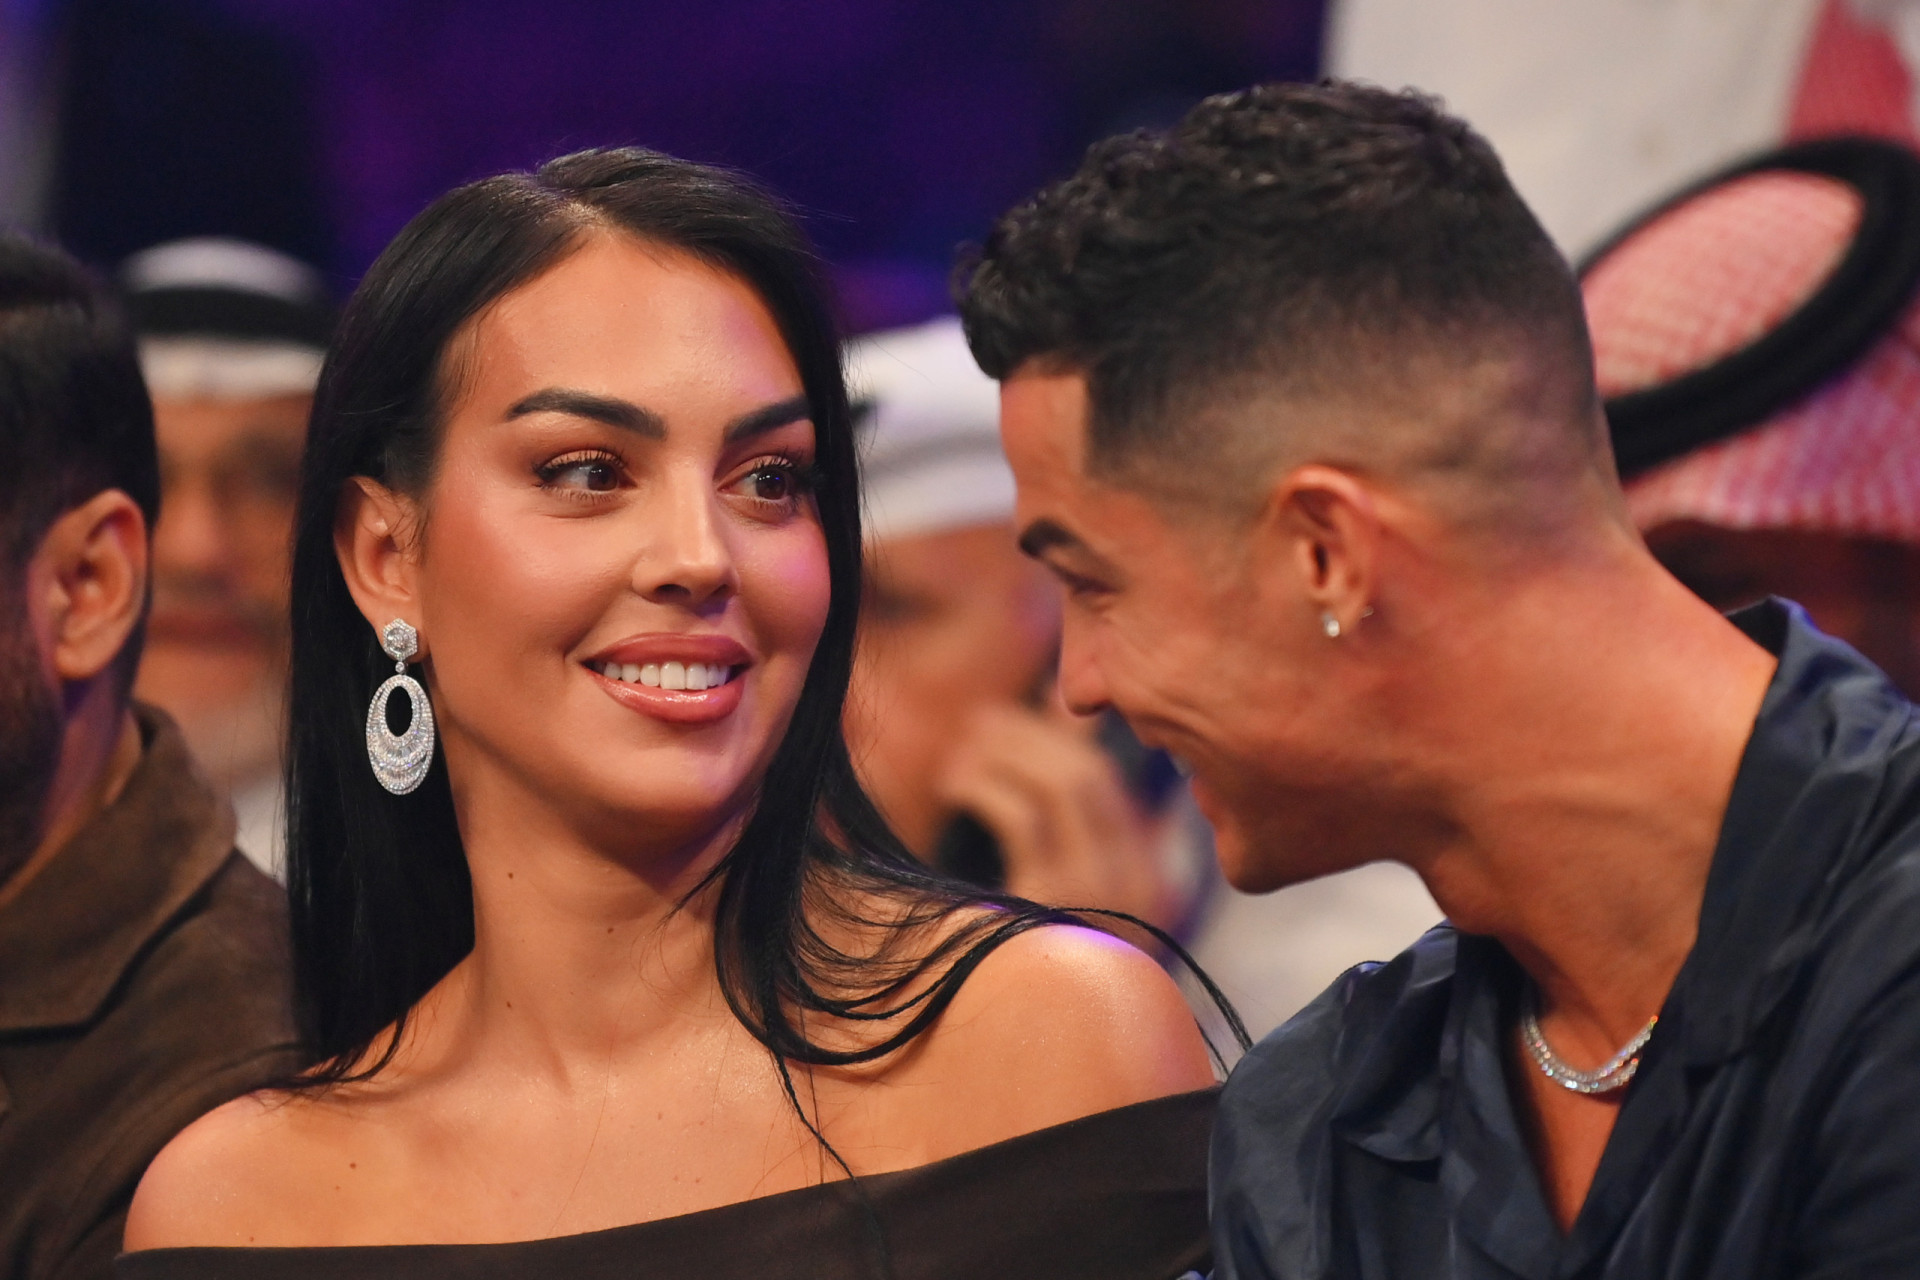 Georgina Rodríguez and Ronaldo's Extravagantly Expensive Outfits While Attending an Event Together, Captivating All Eyes 4